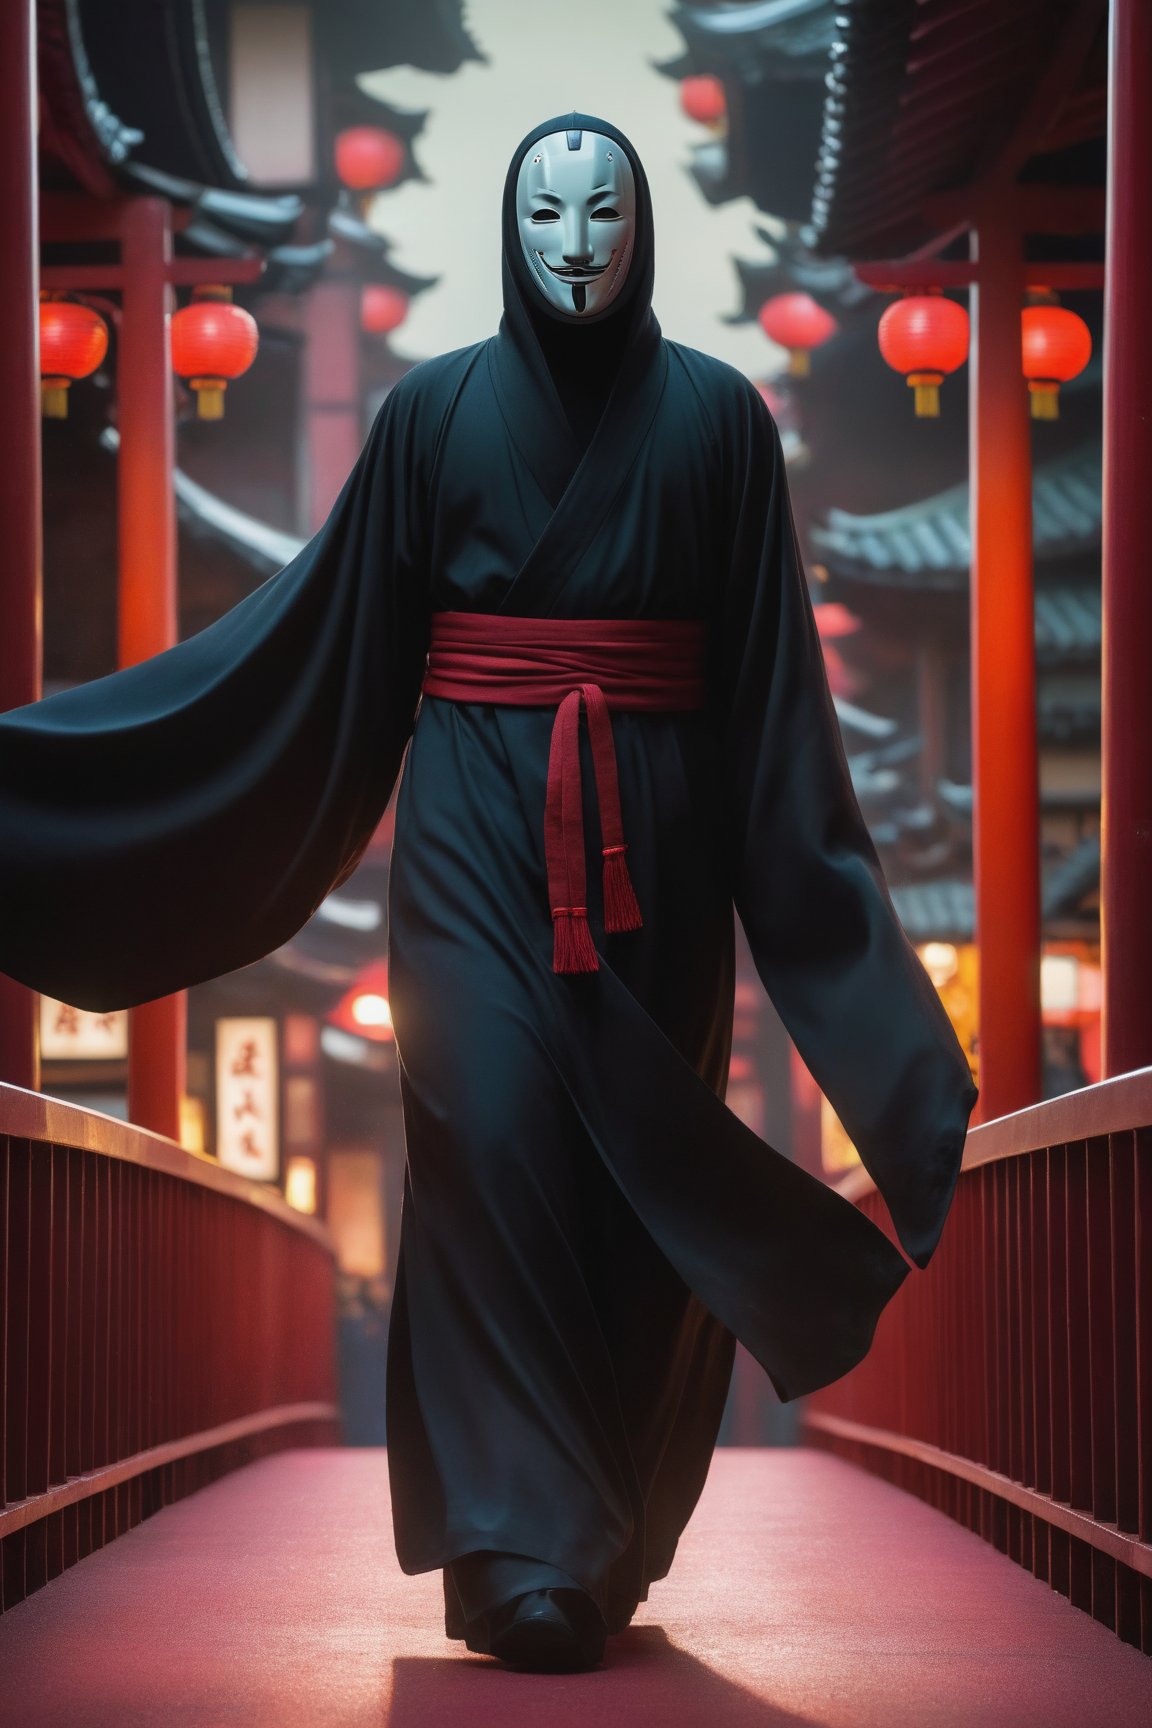 High-energy portrait of No-Face/Kaonashi on a crimson bridge from Spirited Away. Framed in a tight shot, No-Face's imposing figure dominates the composition, standing with legs spread wide and arms outstretched like a dark angel. Harsh red lighting casts an eerie glow, emphasizing his unsettling features. In the style of raw anime, ultra-realistic textures bring forth every detail - from the intricate design on his mask to the subtle sheen on his skin. Pose: powerful, imposing, 1000% stylized, 1:1 aspect ratio, capturing No-Face's otherworldly presence.